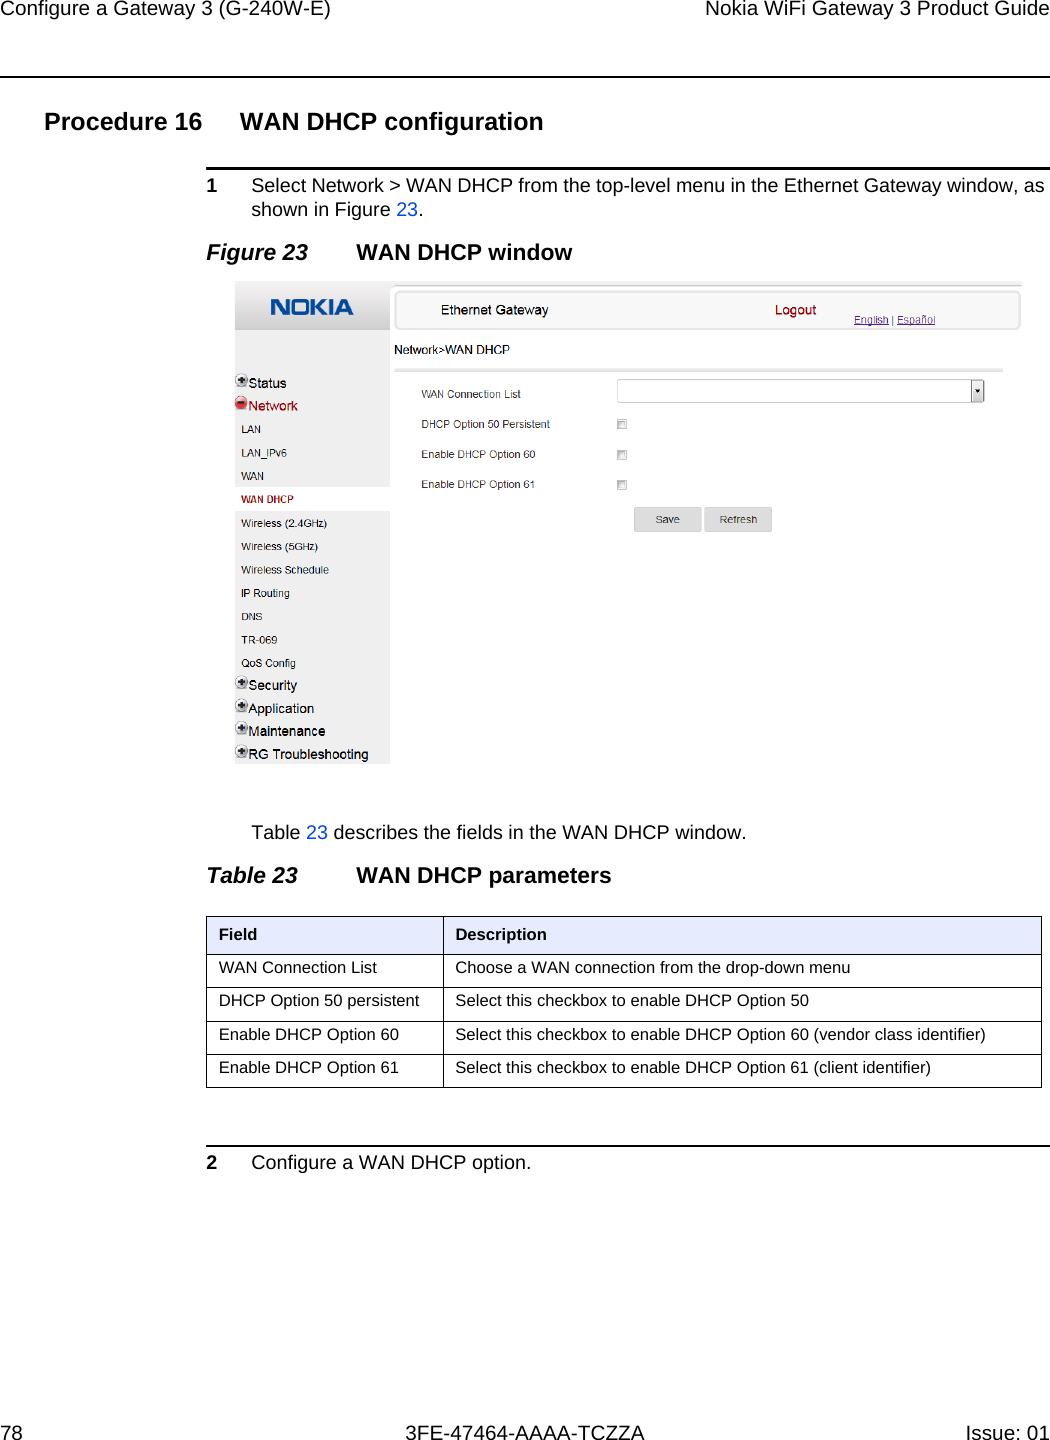 Configure a Gateway 3 (G-240W-E) 78Nokia WiFi Gateway 3 Product Guide3FE-47464-AAAA-TCZZA Issue: 01 Procedure 16 WAN DHCP configuration1Select Network &gt; WAN DHCP from the top-level menu in the Ethernet Gateway window, as shown in Figure 23.Figure 23 WAN DHCP windowTable 23 describes the fields in the WAN DHCP window.Table 23 WAN DHCP parameters2Configure a WAN DHCP option.Field DescriptionWAN Connection List Choose a WAN connection from the drop-down menu DHCP Option 50 persistent Select this checkbox to enable DHCP Option 50Enable DHCP Option 60 Select this checkbox to enable DHCP Option 60 (vendor class identifier)Enable DHCP Option 61 Select this checkbox to enable DHCP Option 61 (client identifier)